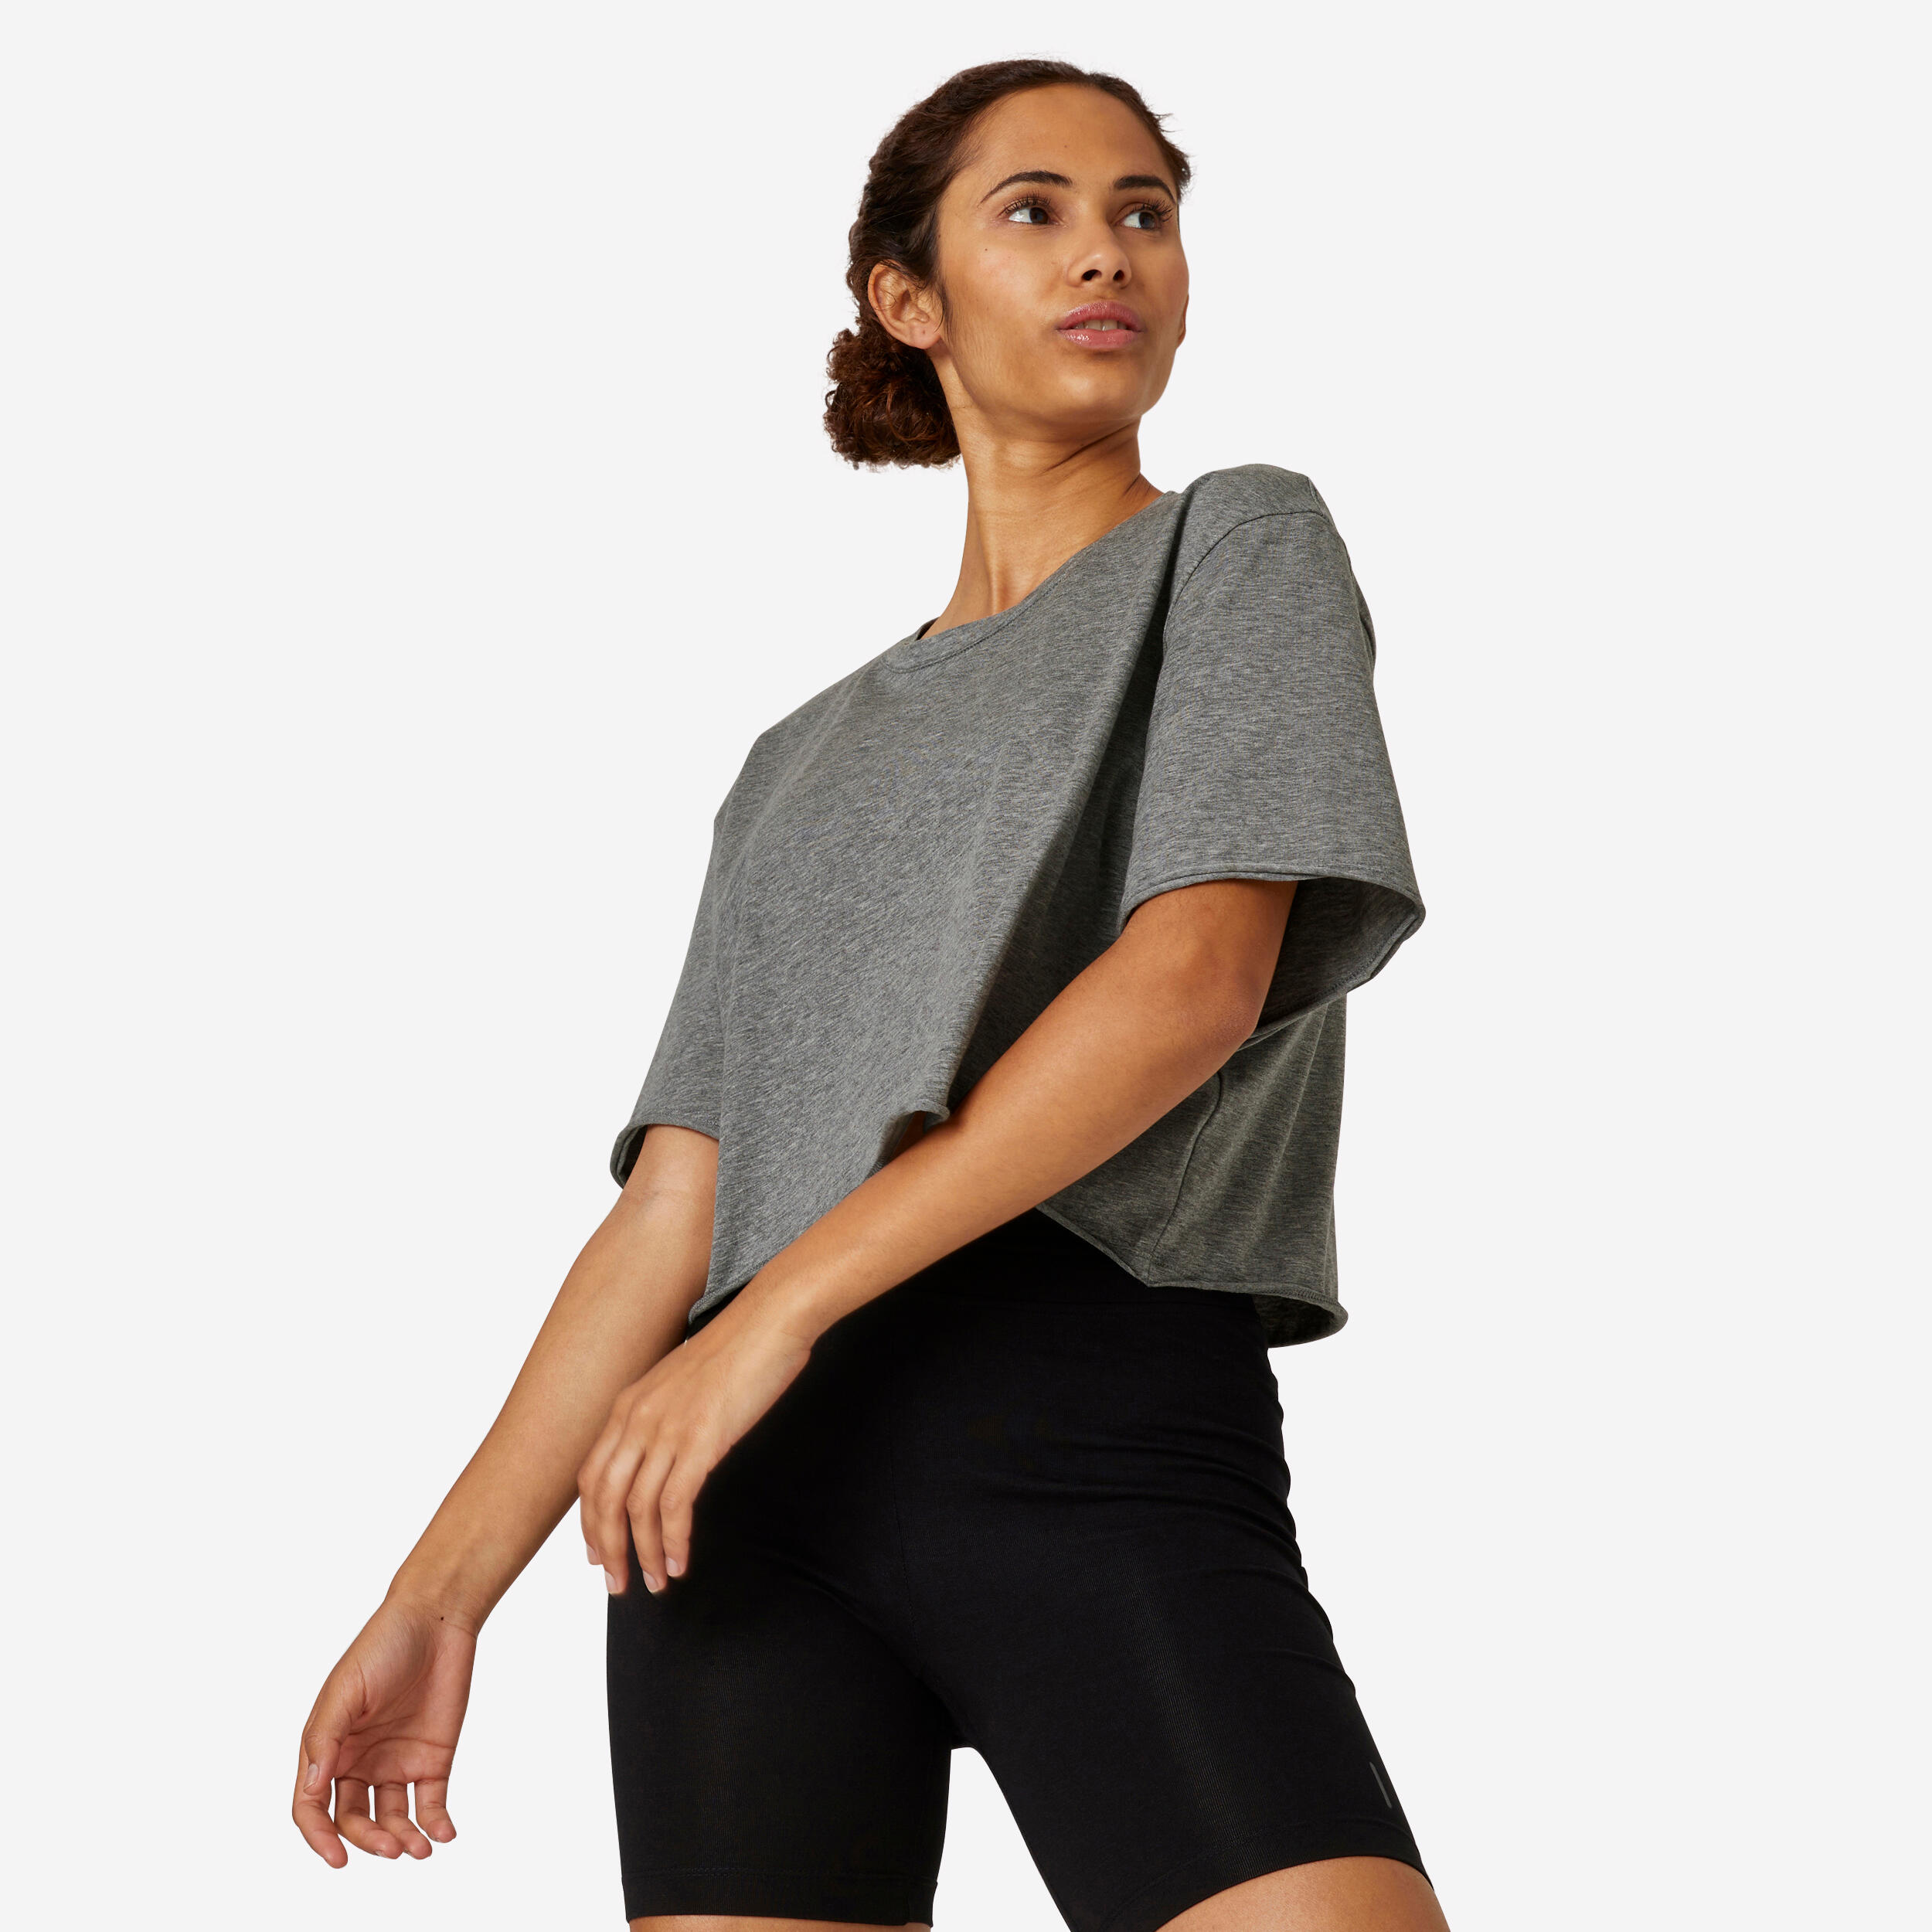 Women's Fitness Cropped T-Shirt 520 - Grey 7/8